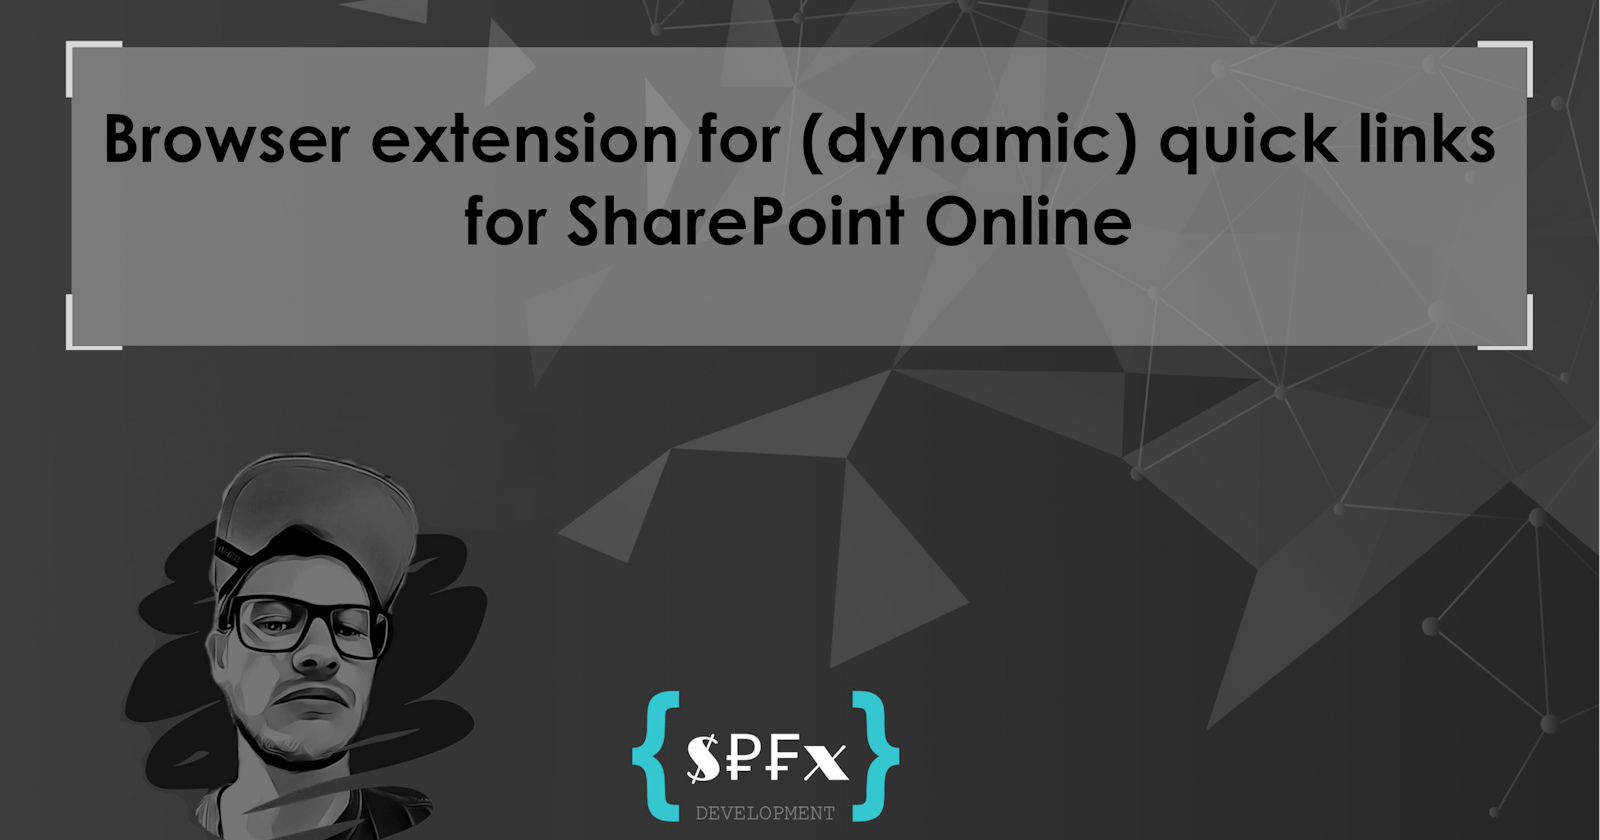 Browser extension for (dynamic) quick links for SharePoint Online